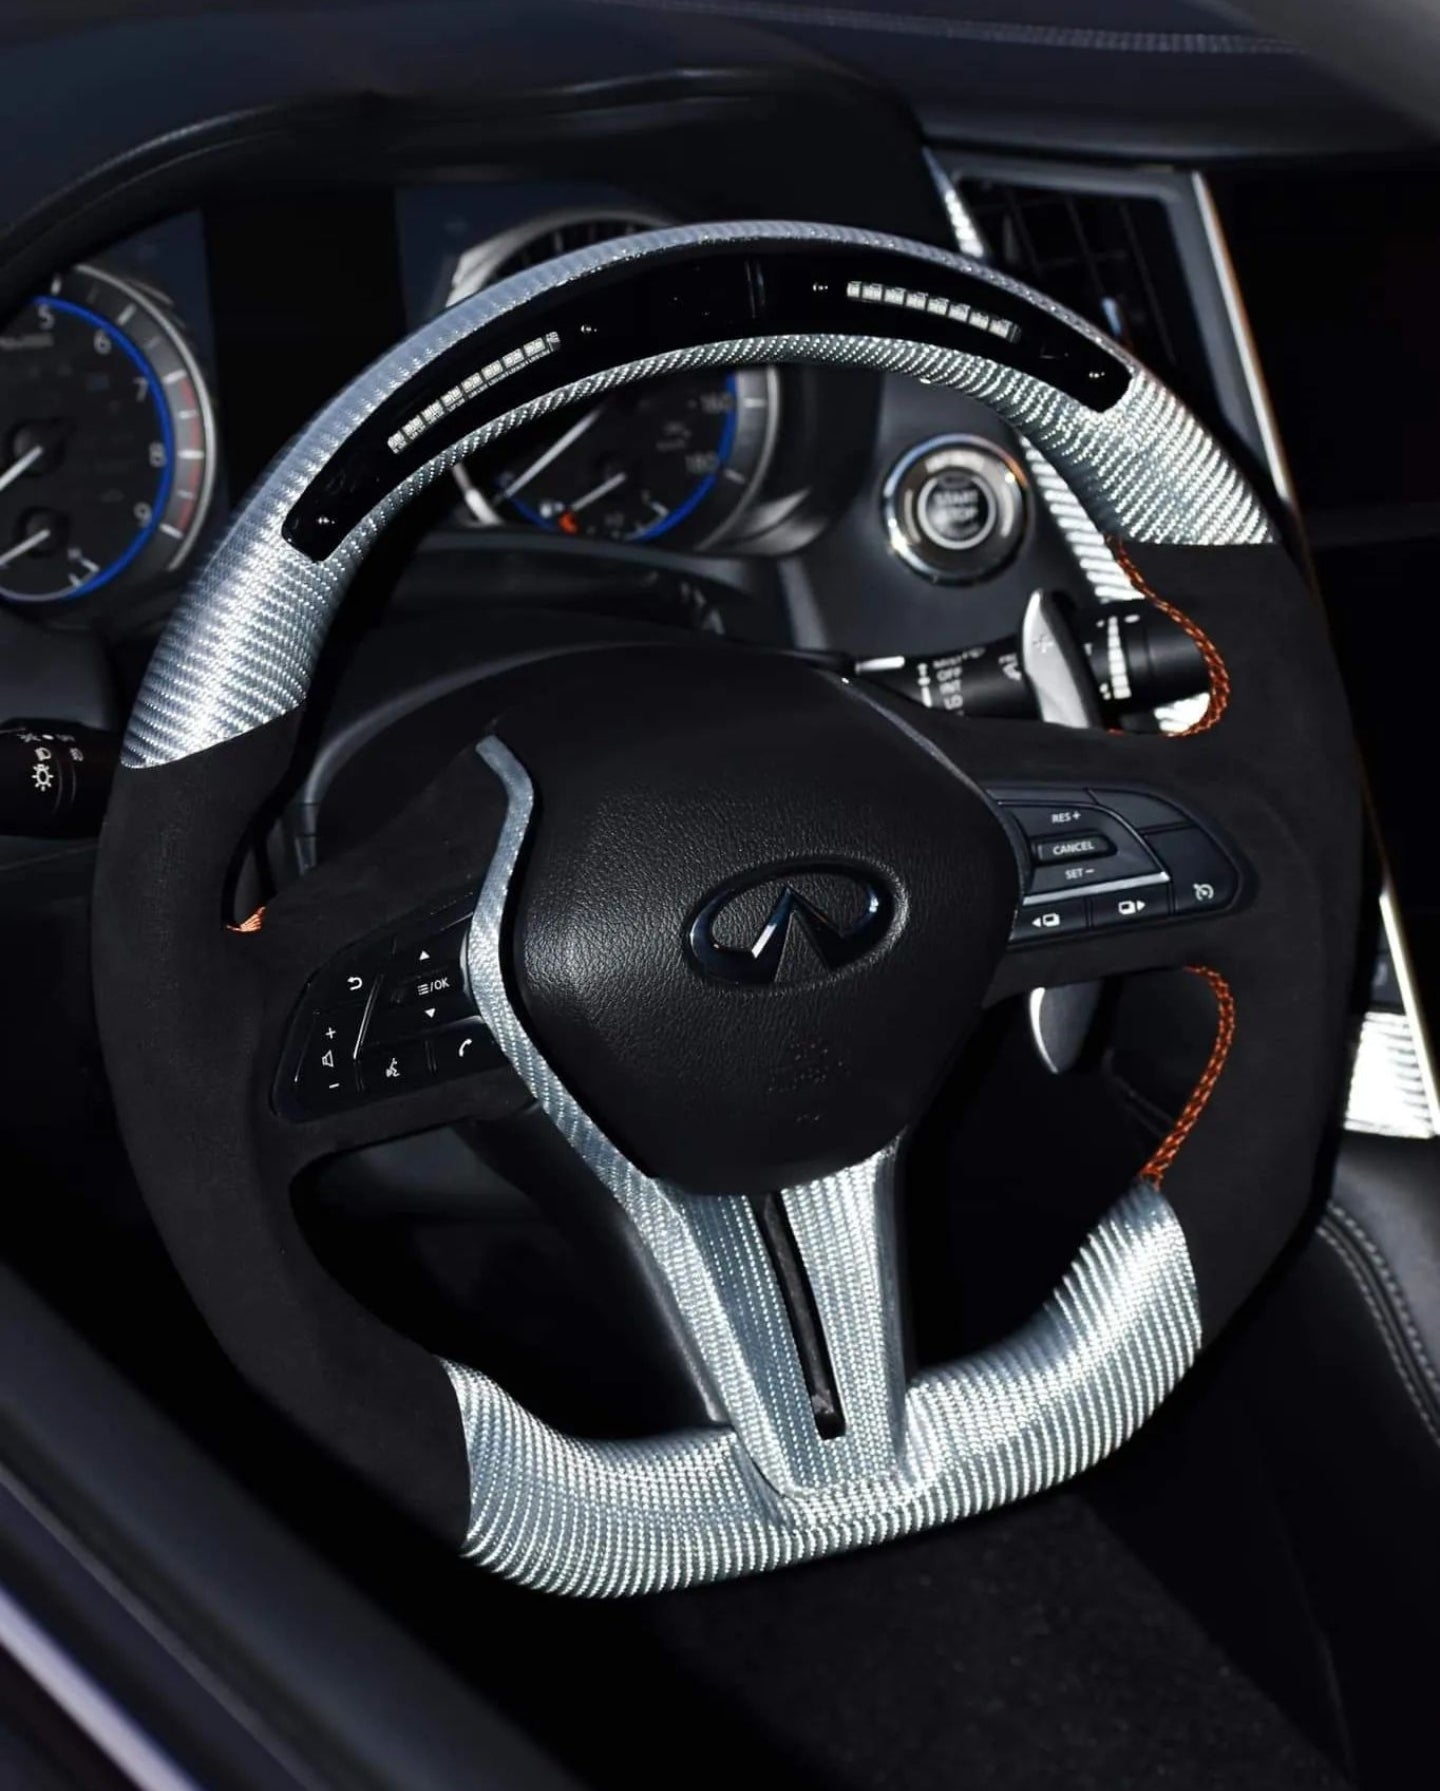 Jalisco's gray carbon fiber steering wheel with suede-like grips and LED screen top for Infiniti Q50/Q60.